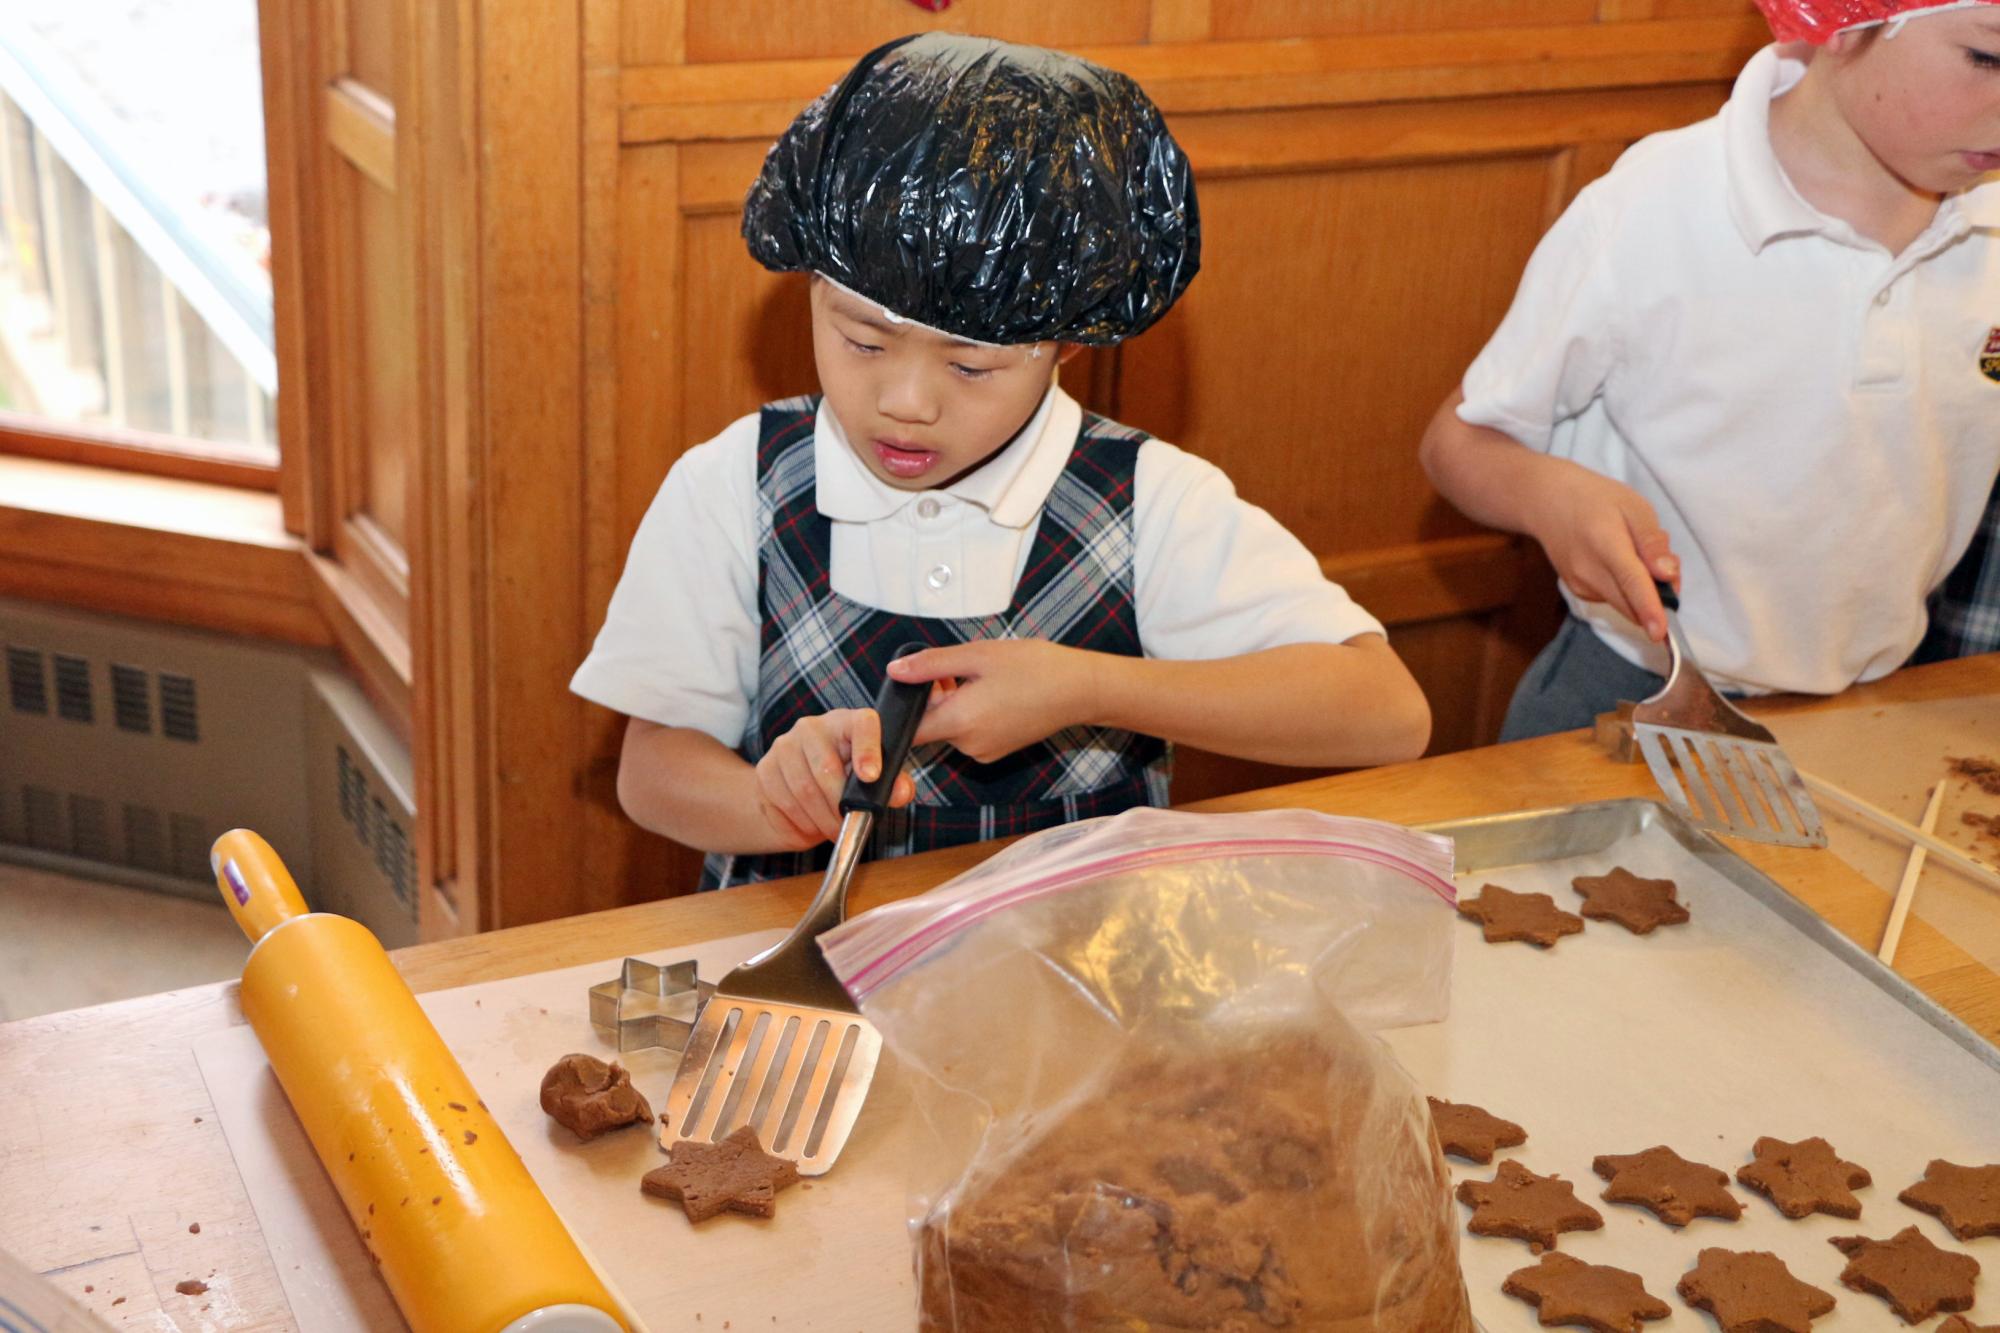 A Grade 2 student focuses on making gingerbread cookies